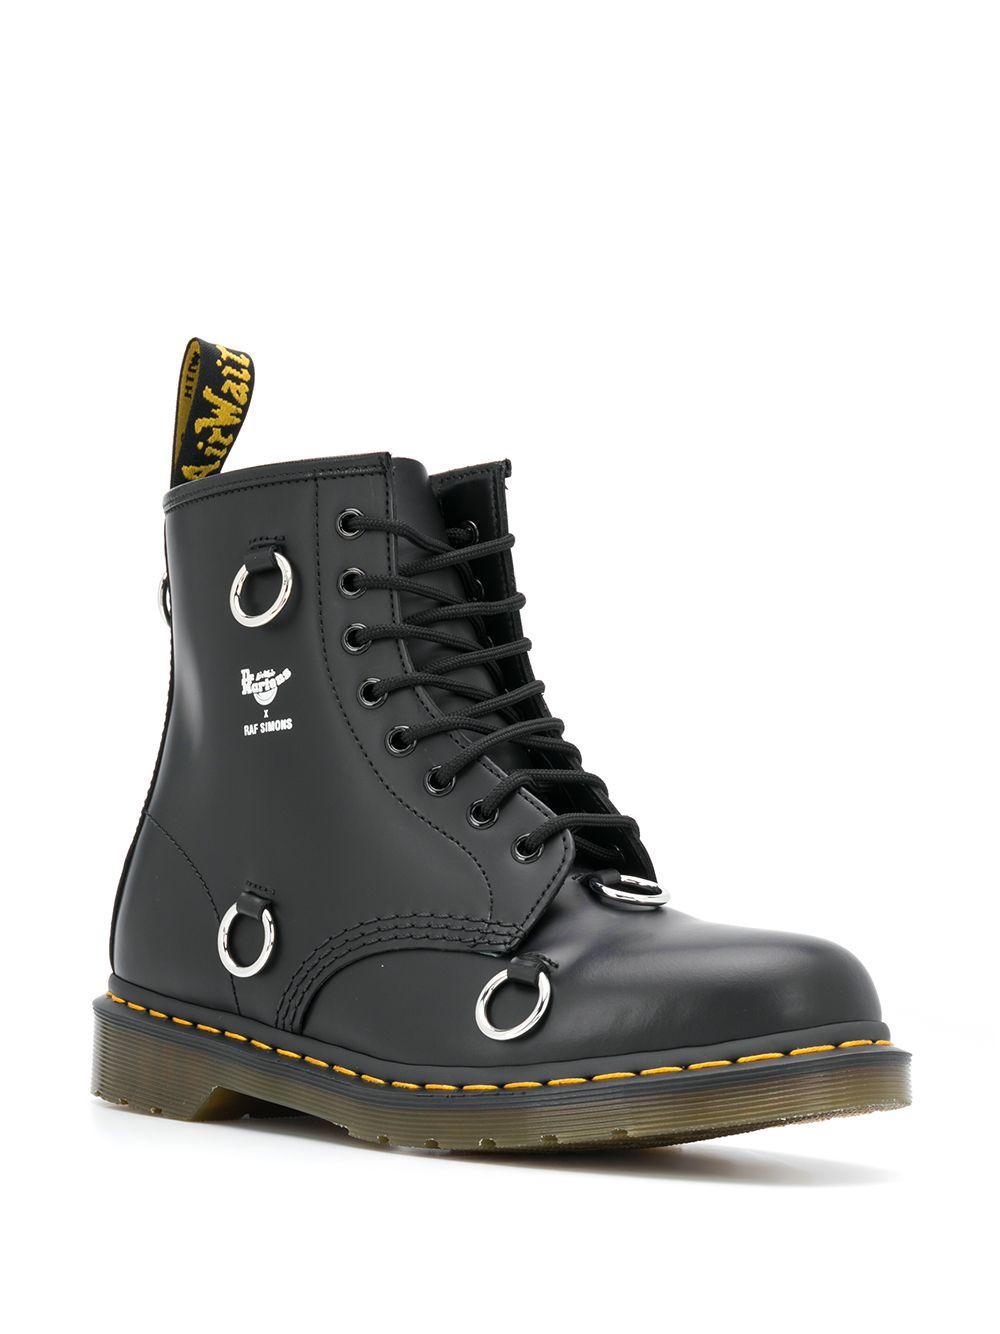 Raf Simons X Dr. Martens Leather Boots in Black for Men - Lyst